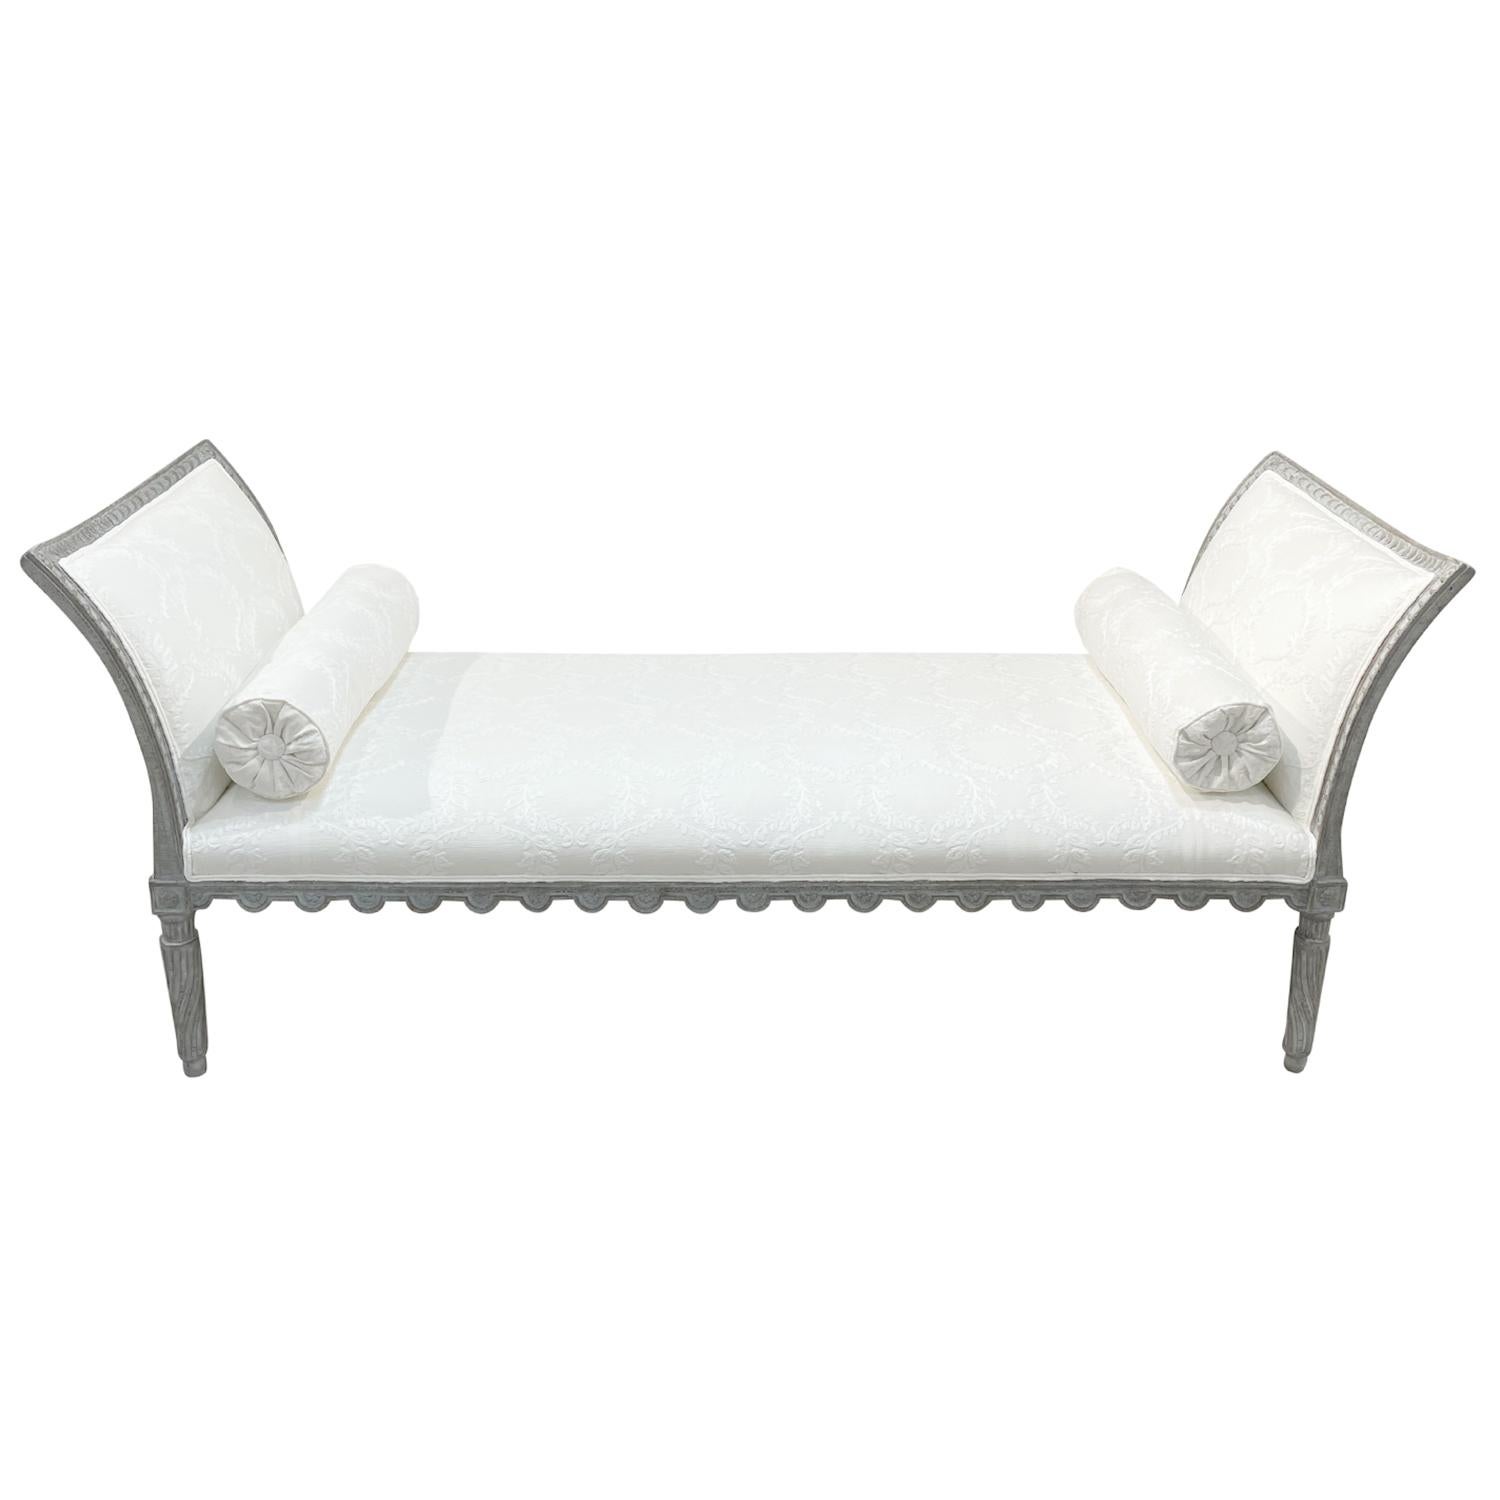 A white-grey, antique Swedish Gustavian daybed, wood sofa with two round pillows made of hand carved Pinewood, in good condition. The side rests of the freestanding Scandinavian Lit Du Jour are curved, outstretched, supported by four, small round